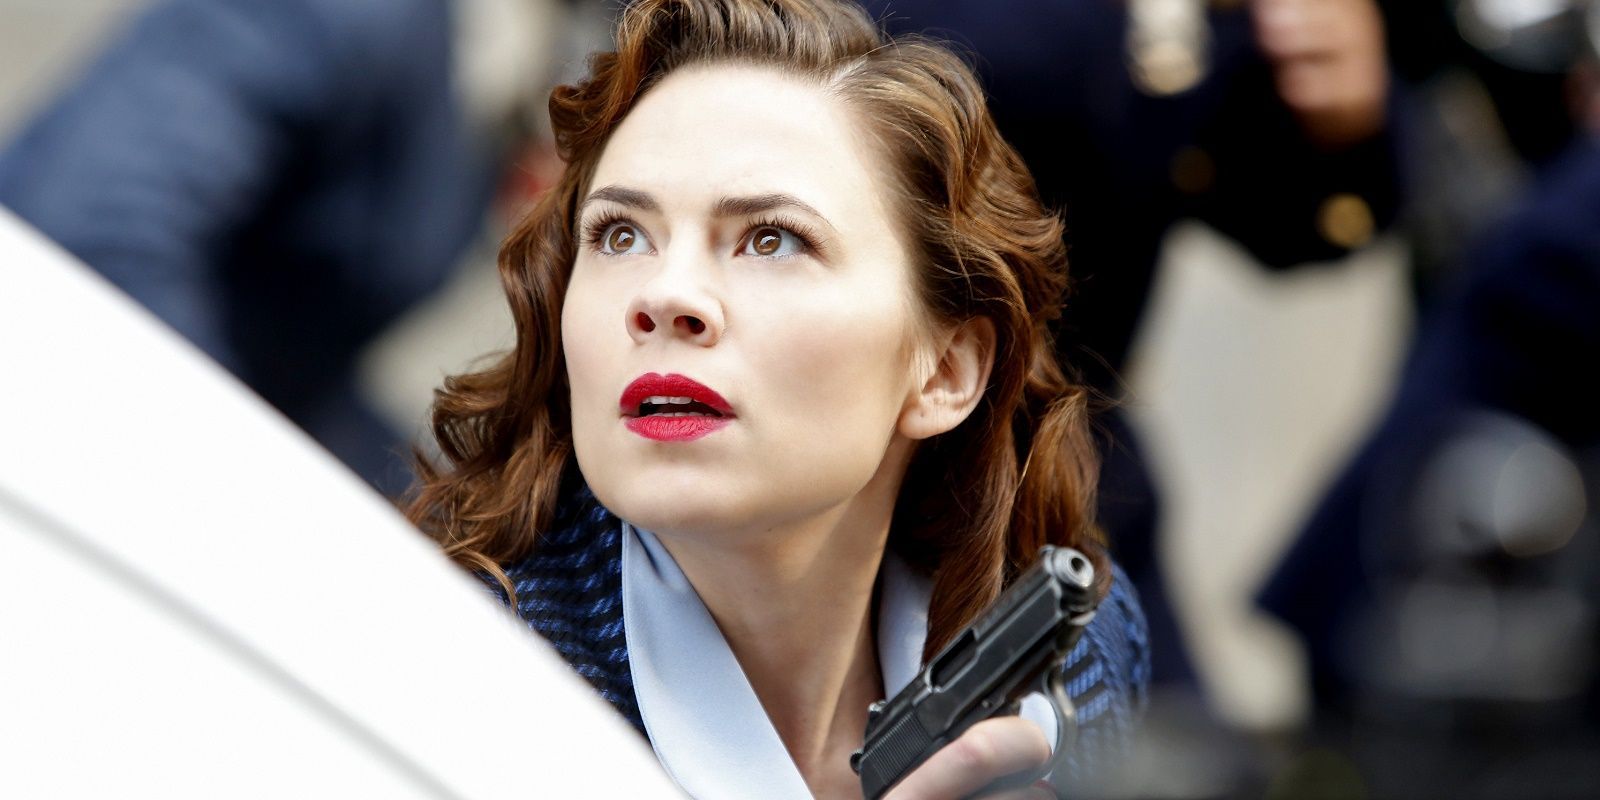 Agent Carter Canceled by ABC After 2 Seasons